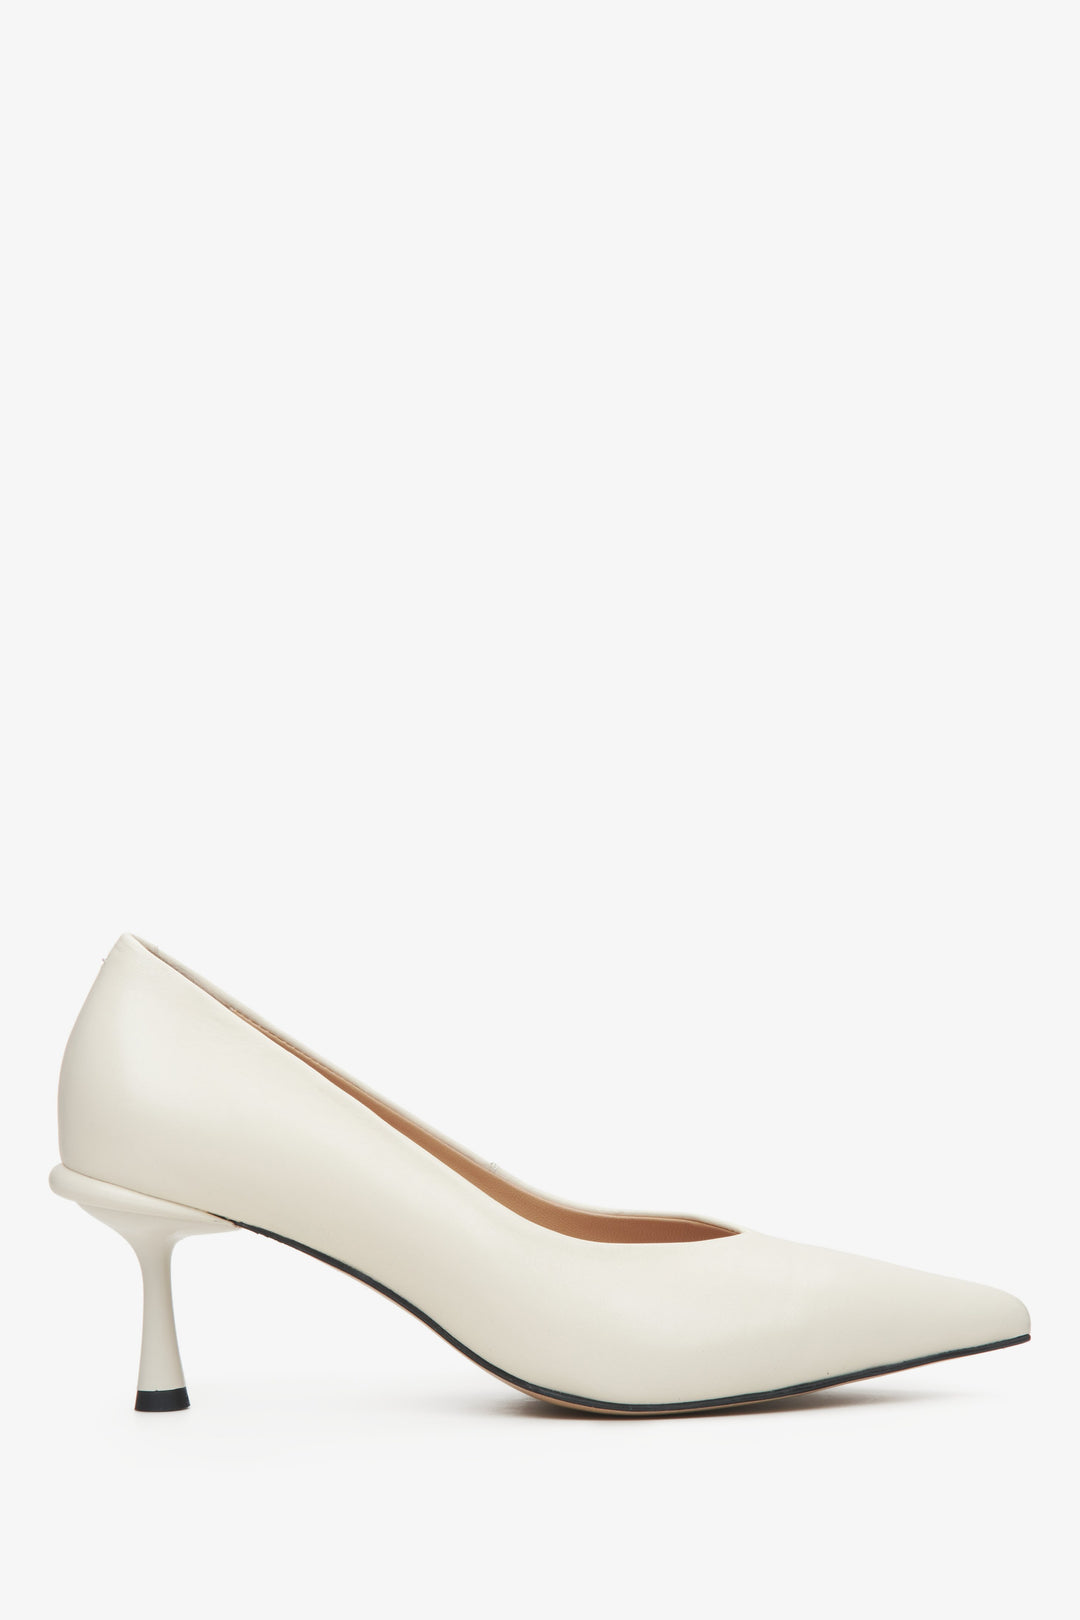 Milky-Beige Genuine Leather Pumps with Pointed Toe Estro ER00115098.